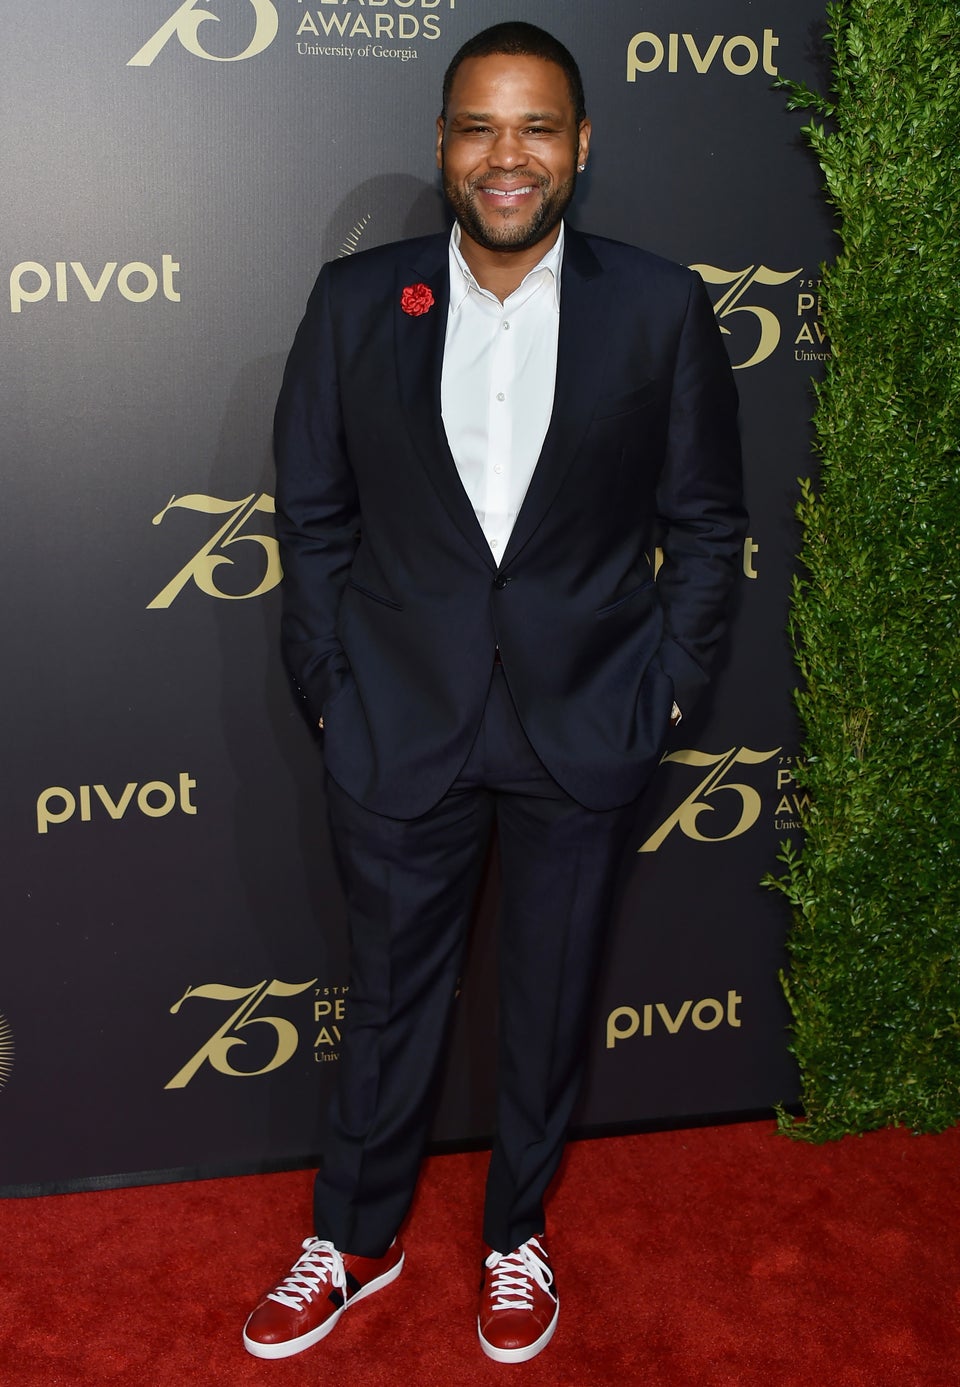 Anthony Anderson on Diversity in Hollywood: ‘We Want To Be Included’